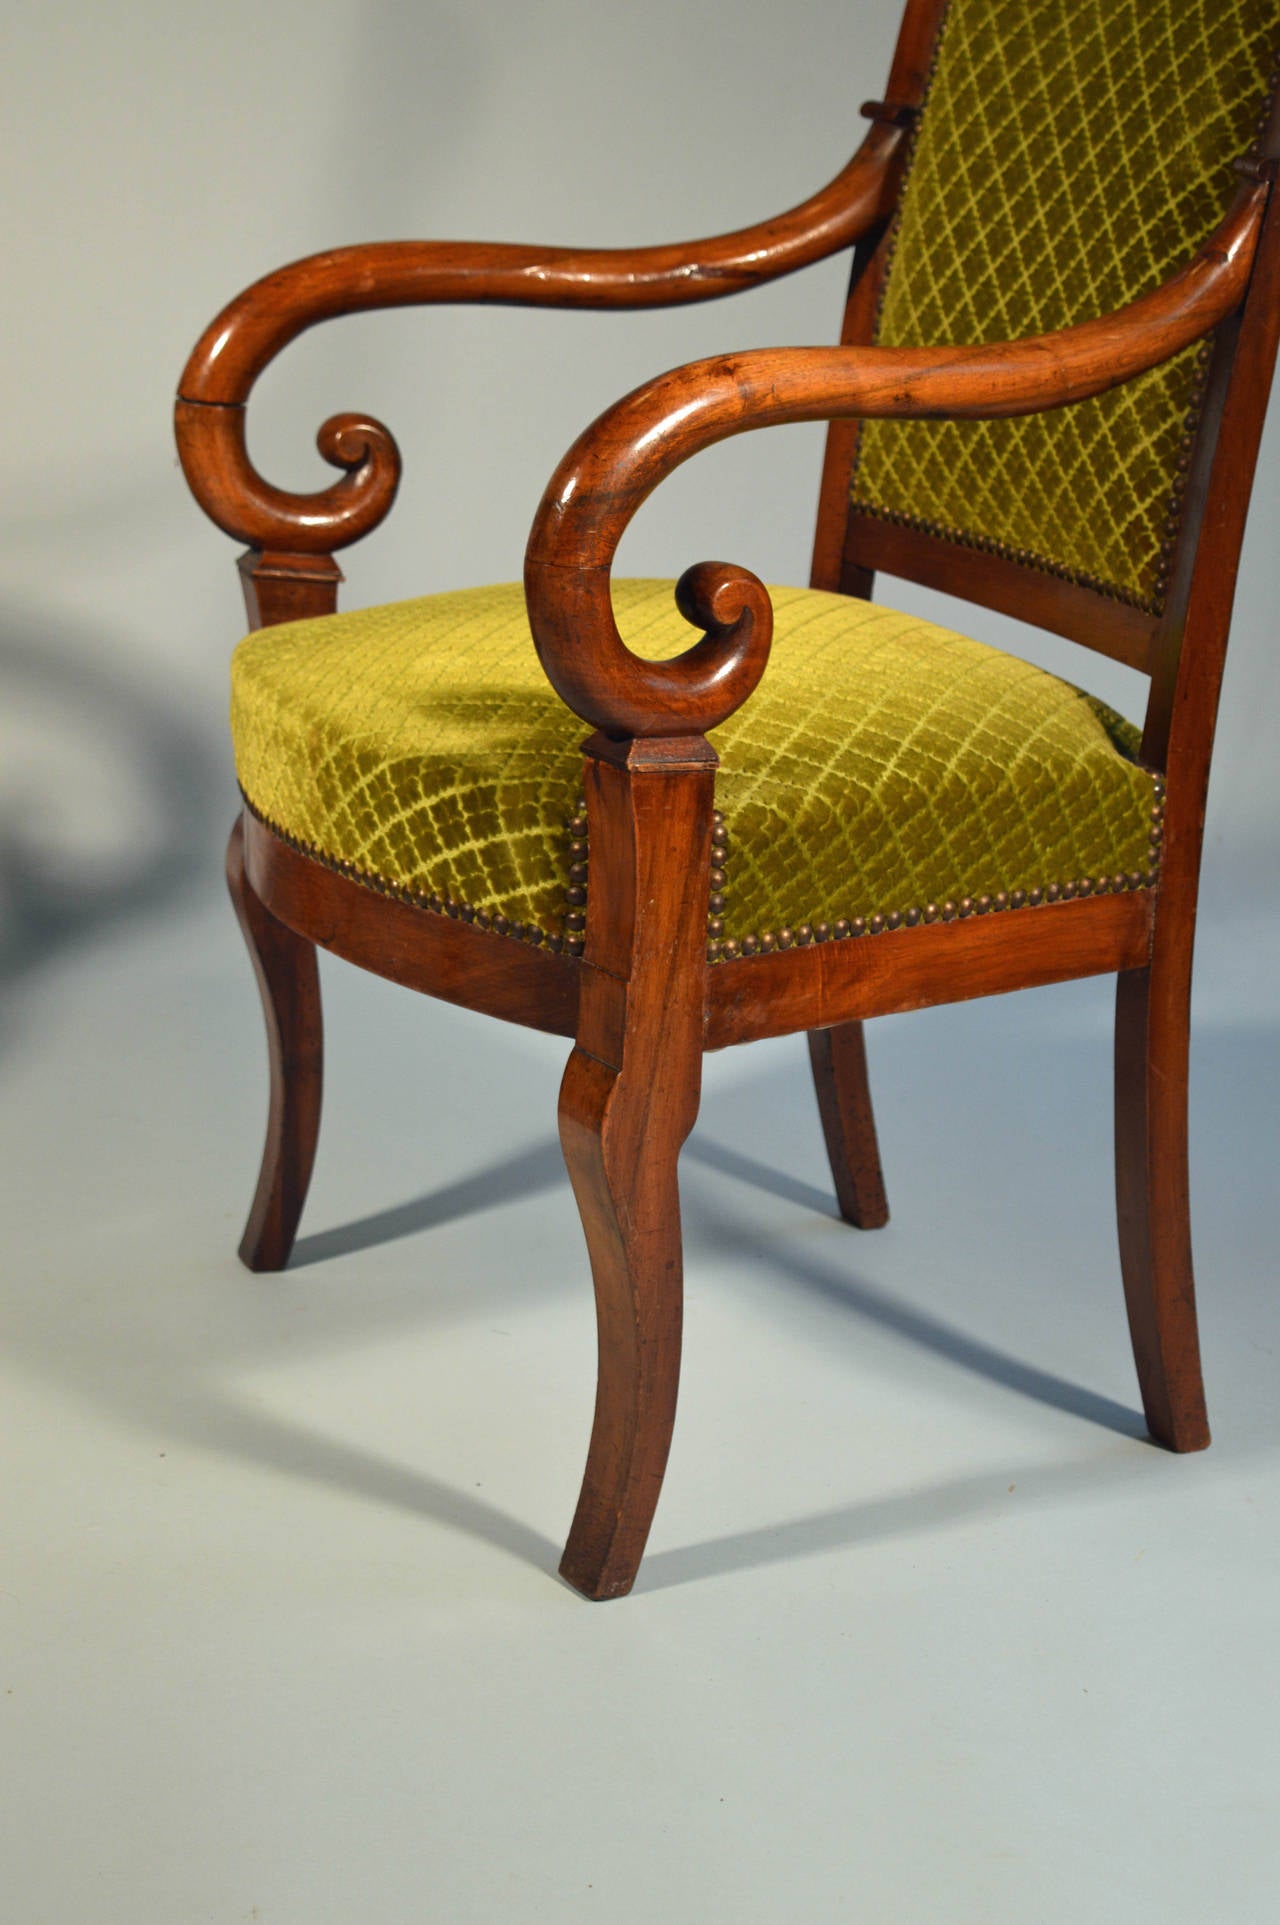 A pair of early nineteenth century mahogany fauteuils with curved arm supports, straight backs and sabre legs.